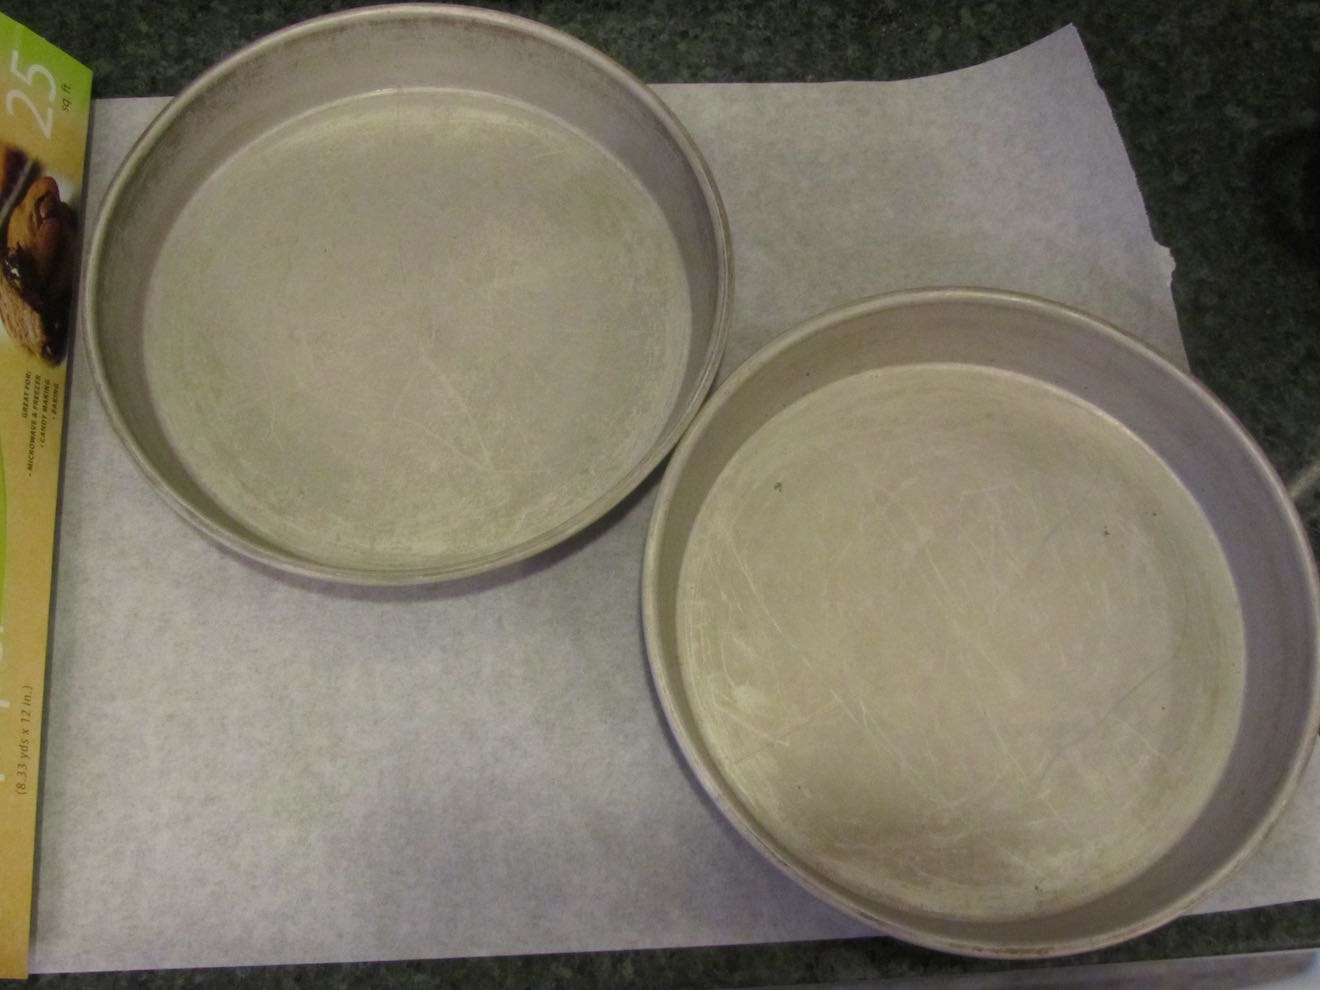 creative savv: The cost of buying parchment paper for baking cake layers